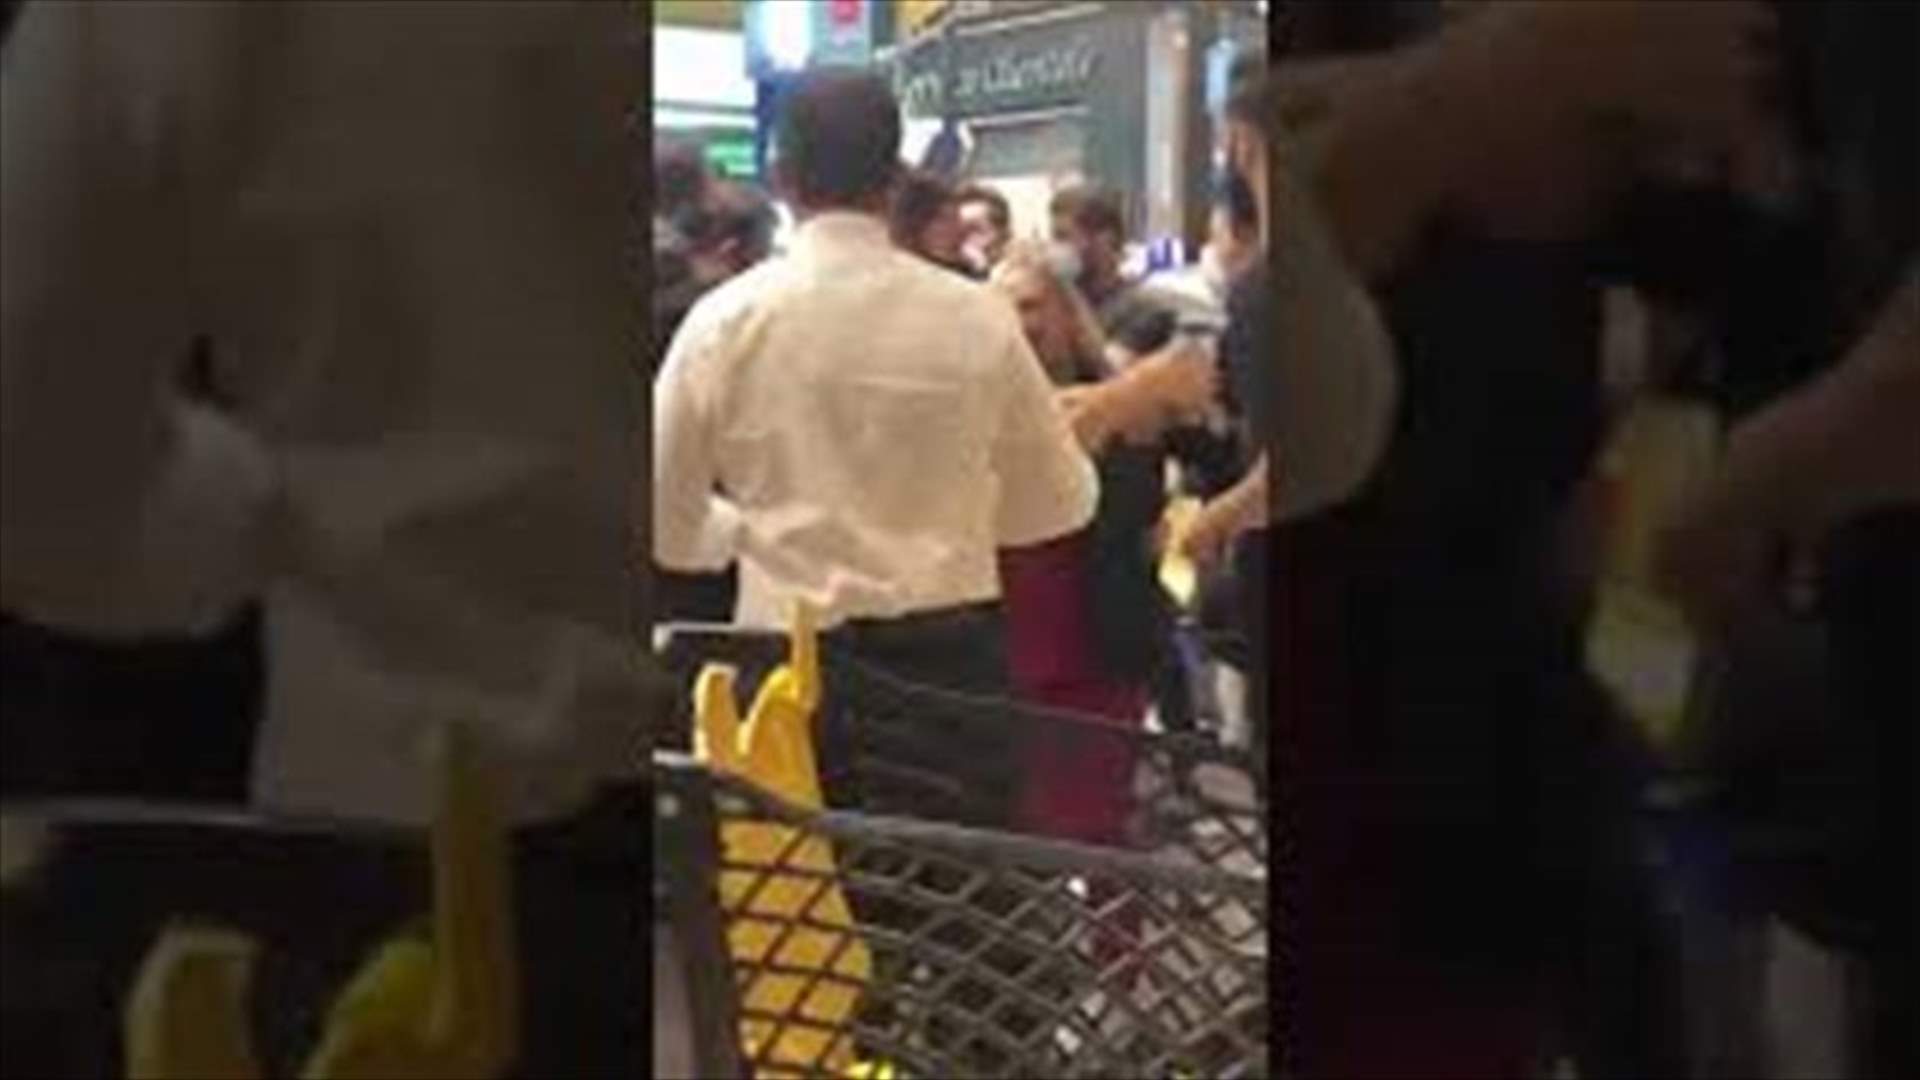 Fight breaks out inside Spinneys over subsidized items-[VIDEO]